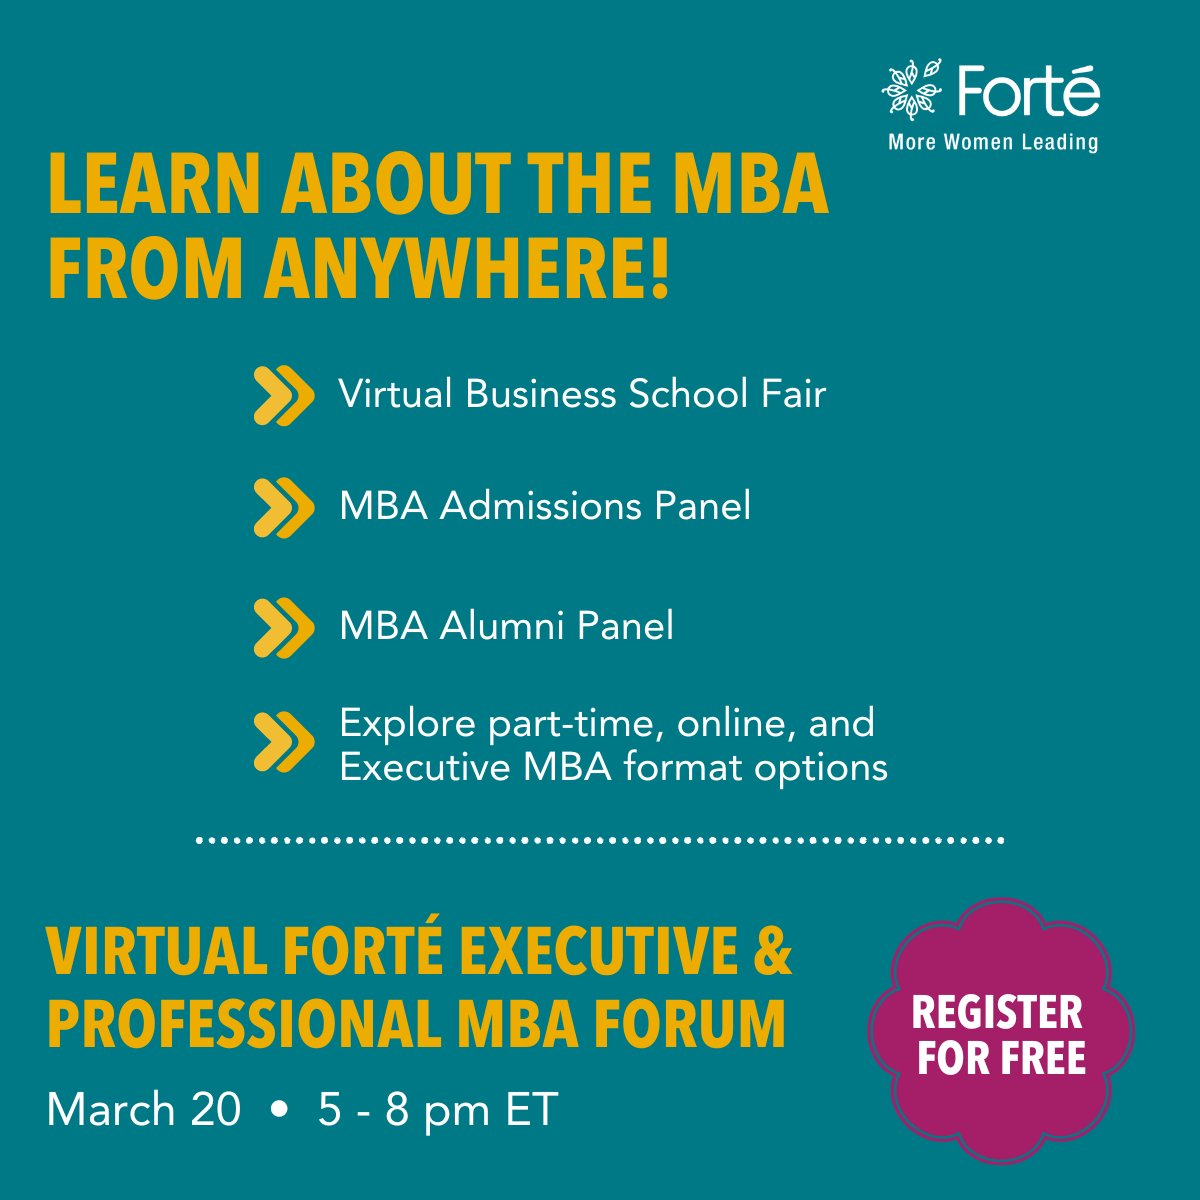 Considering a part-time, online, or Executive #MBA? Join us tonight at the Virtual Forté EMBA Forum. Connect with 40+ b-school reps, get admissions tips, and hear from MBA alumni. The best part? It's free and you can attend from anywhere! #MoreWomenLeading ow.ly/kCSb50QXklK